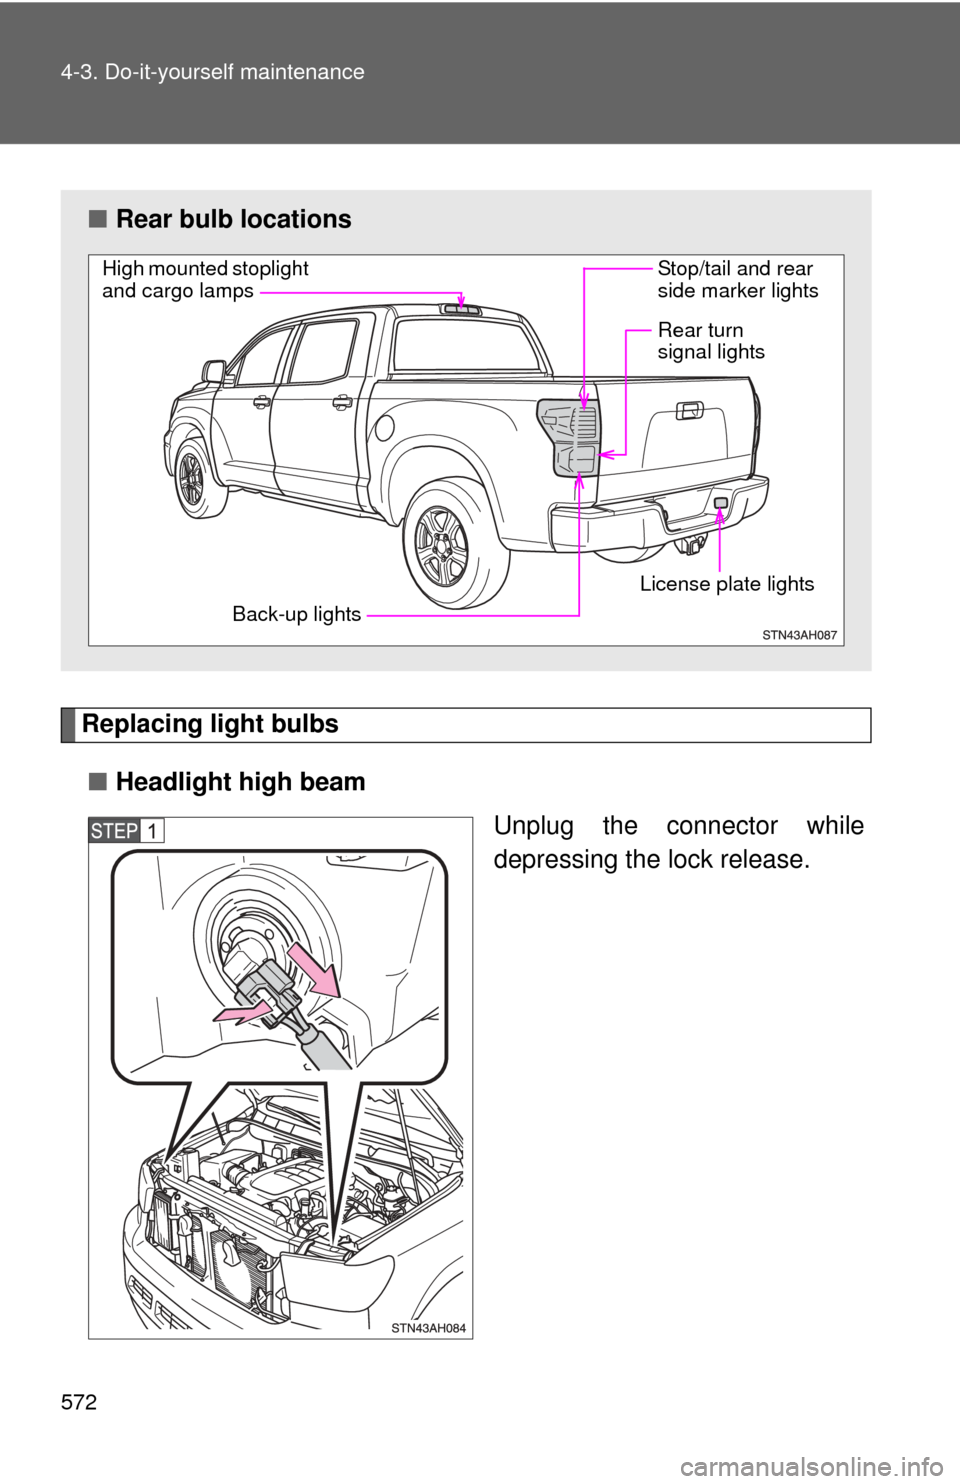 TOYOTA TUNDRA 2010 2.G Owners Manual 572 4-3. Do-it-yourself maintenance
Replacing light bulbs■ Headlight high beam
Unplug the connector while
depressing the lock release.
■Rear bulb locations
High mounted stoplight 
and cargo lamps 